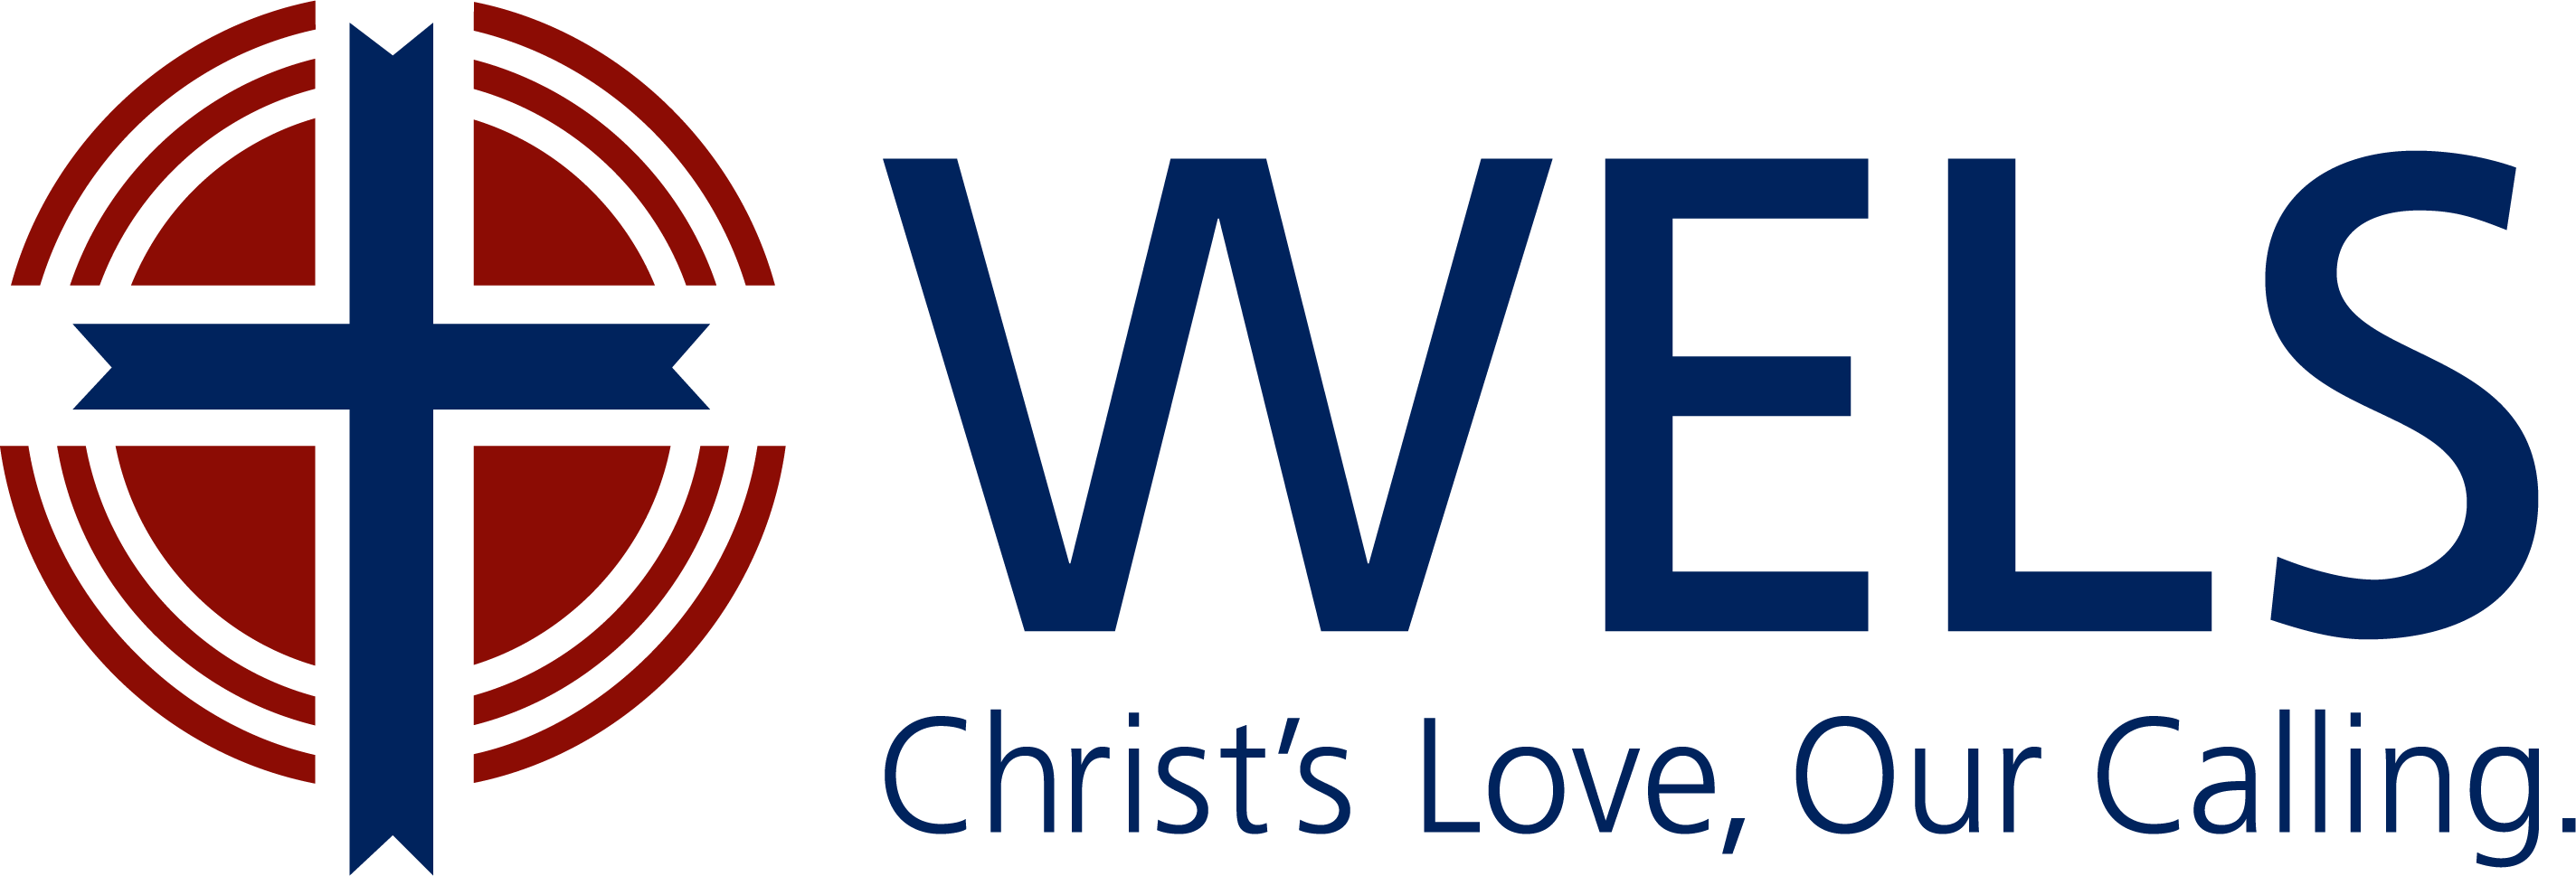 Logo for the Wisconsin Evangelical Lutheran Synod